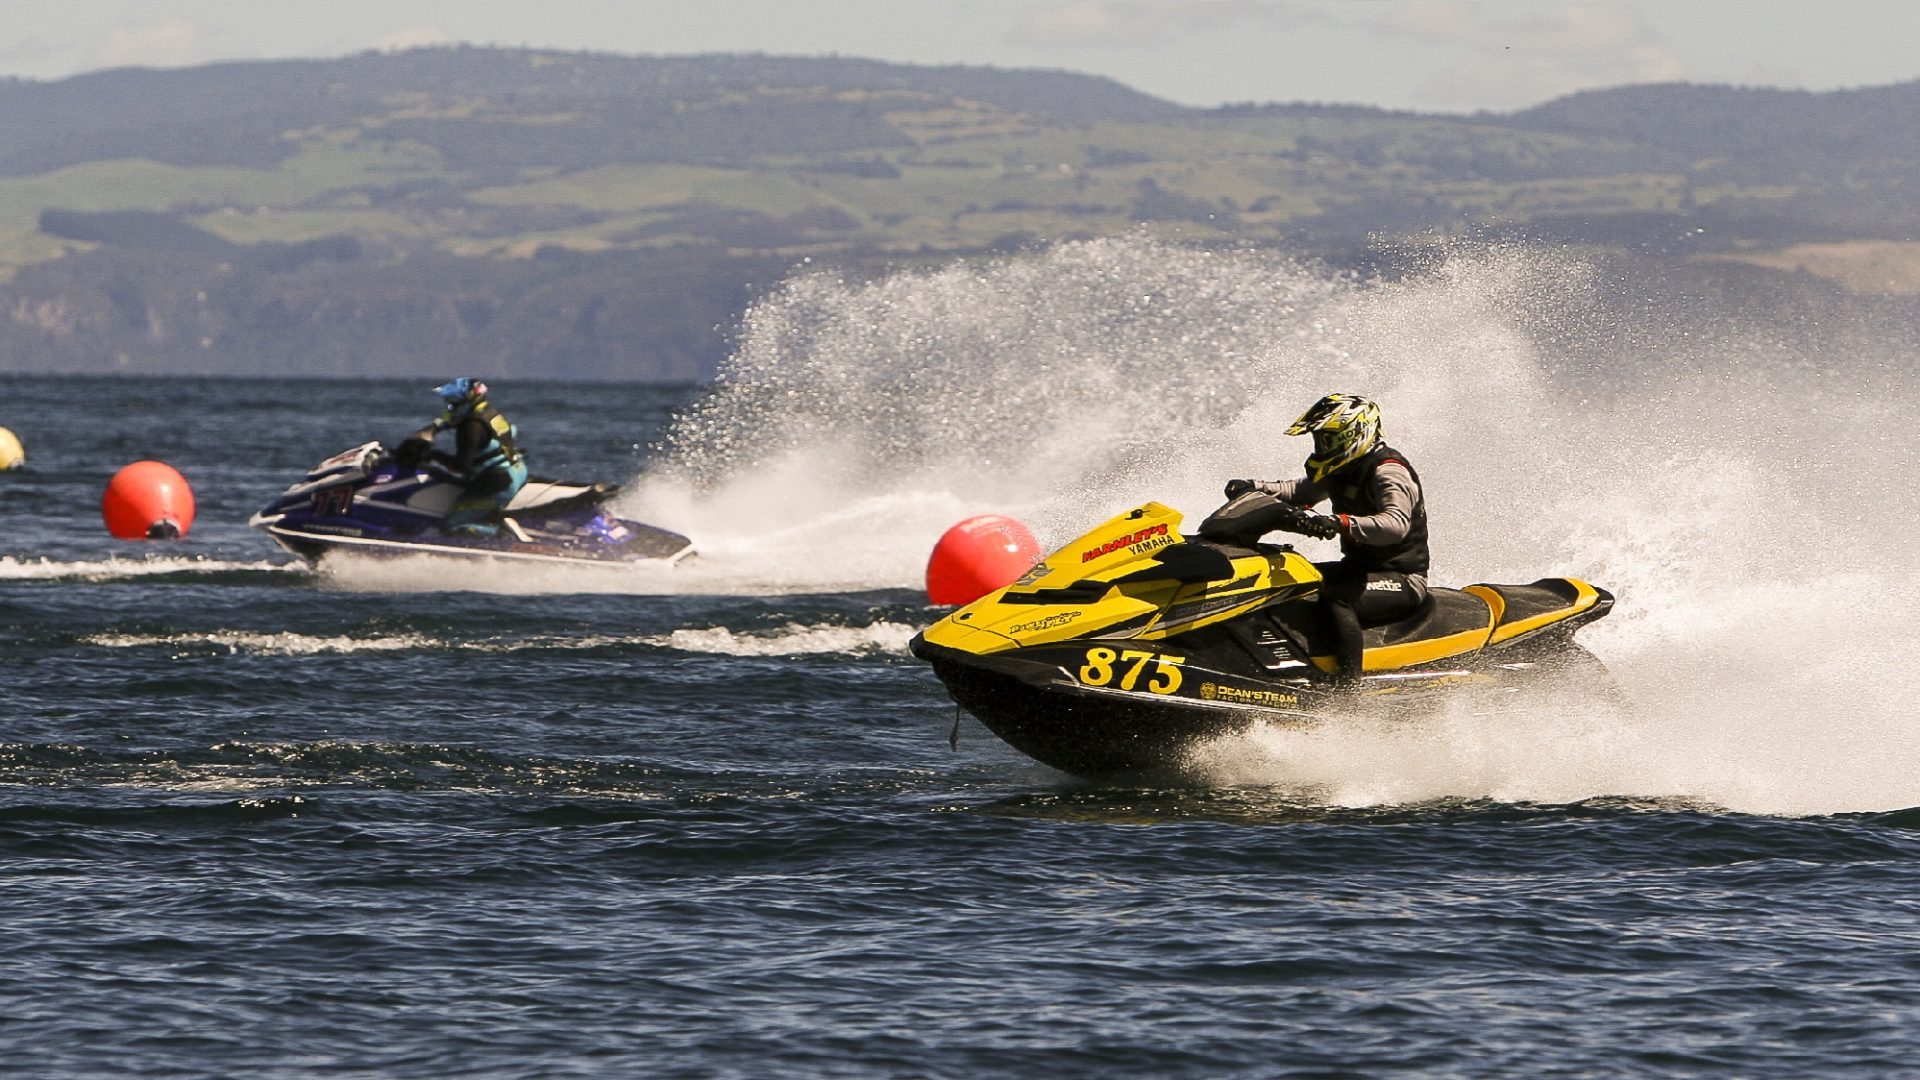 Jet Ski Racing Nz - Page 2 Of 3 - The Official Site Of Nz